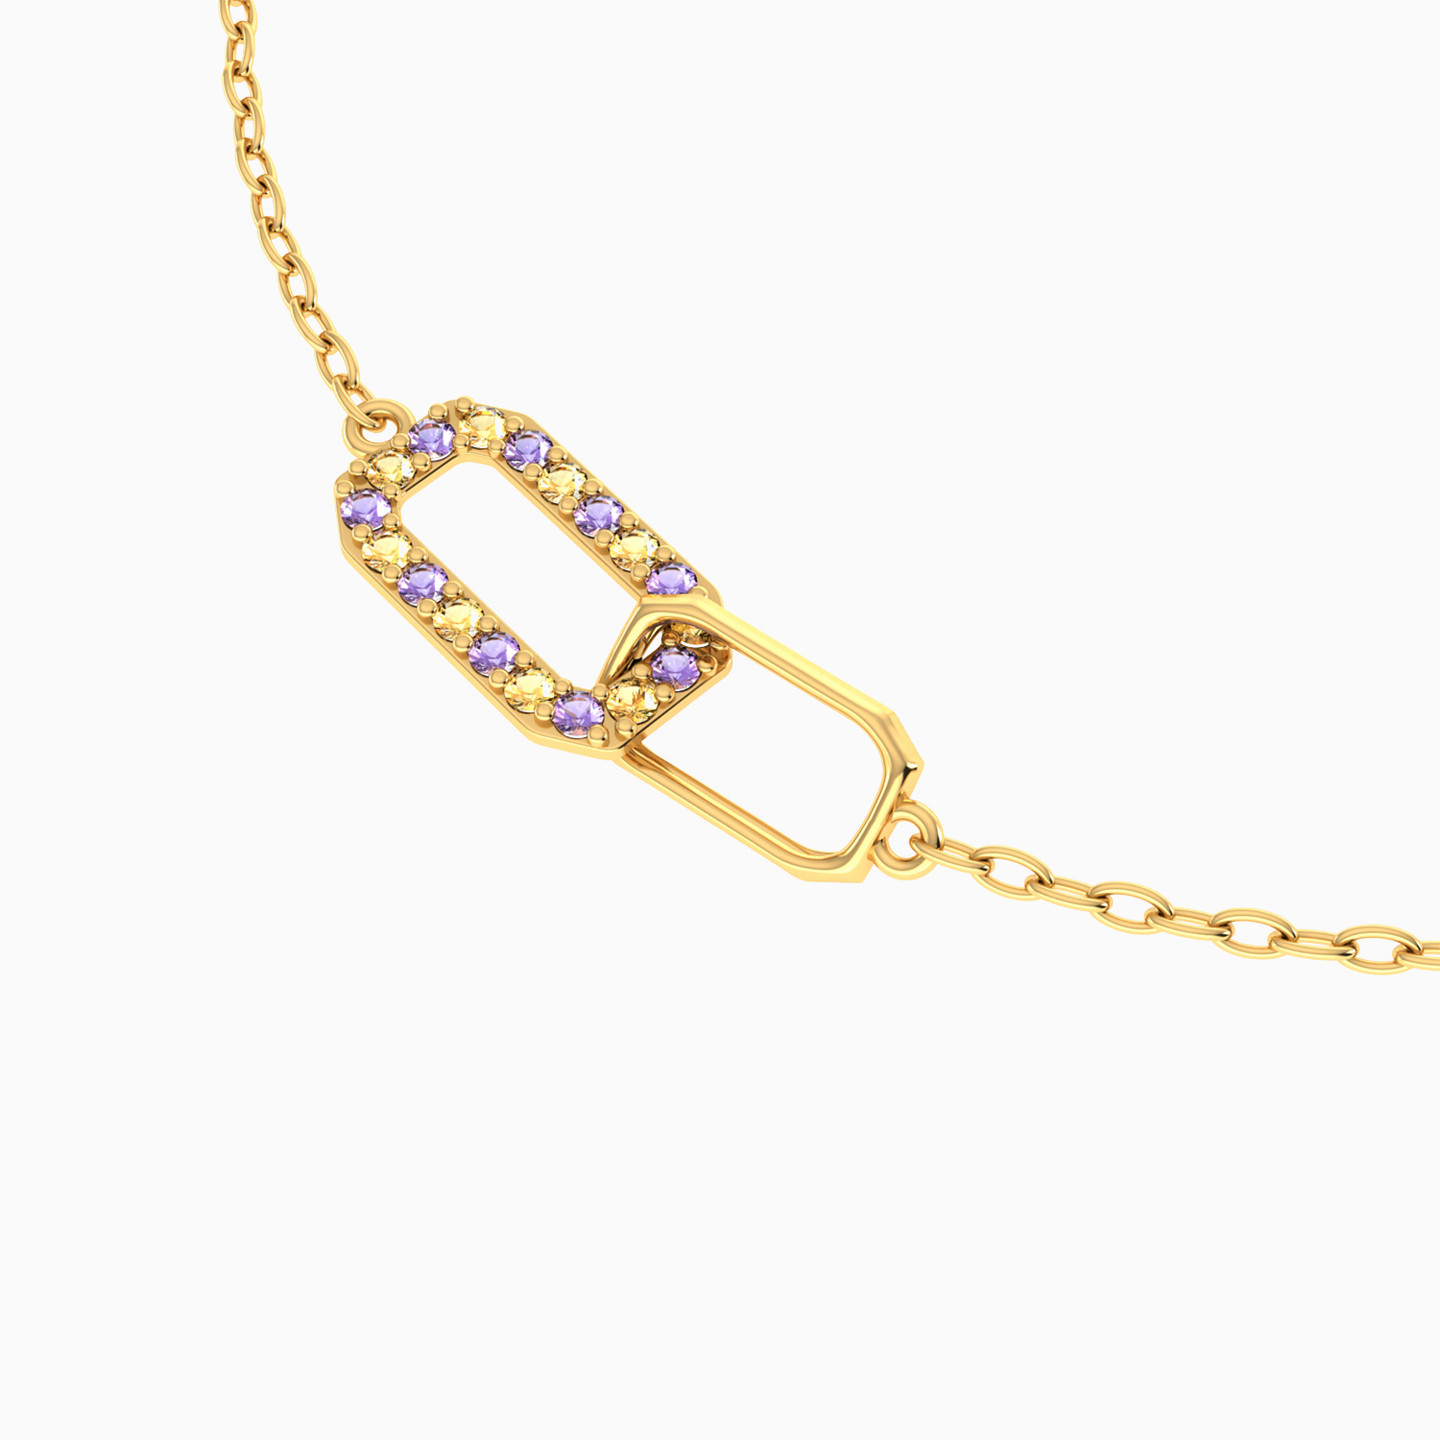 Rectangle Shaped Colored Stones Chain Bracelet in 18K Gold - 3